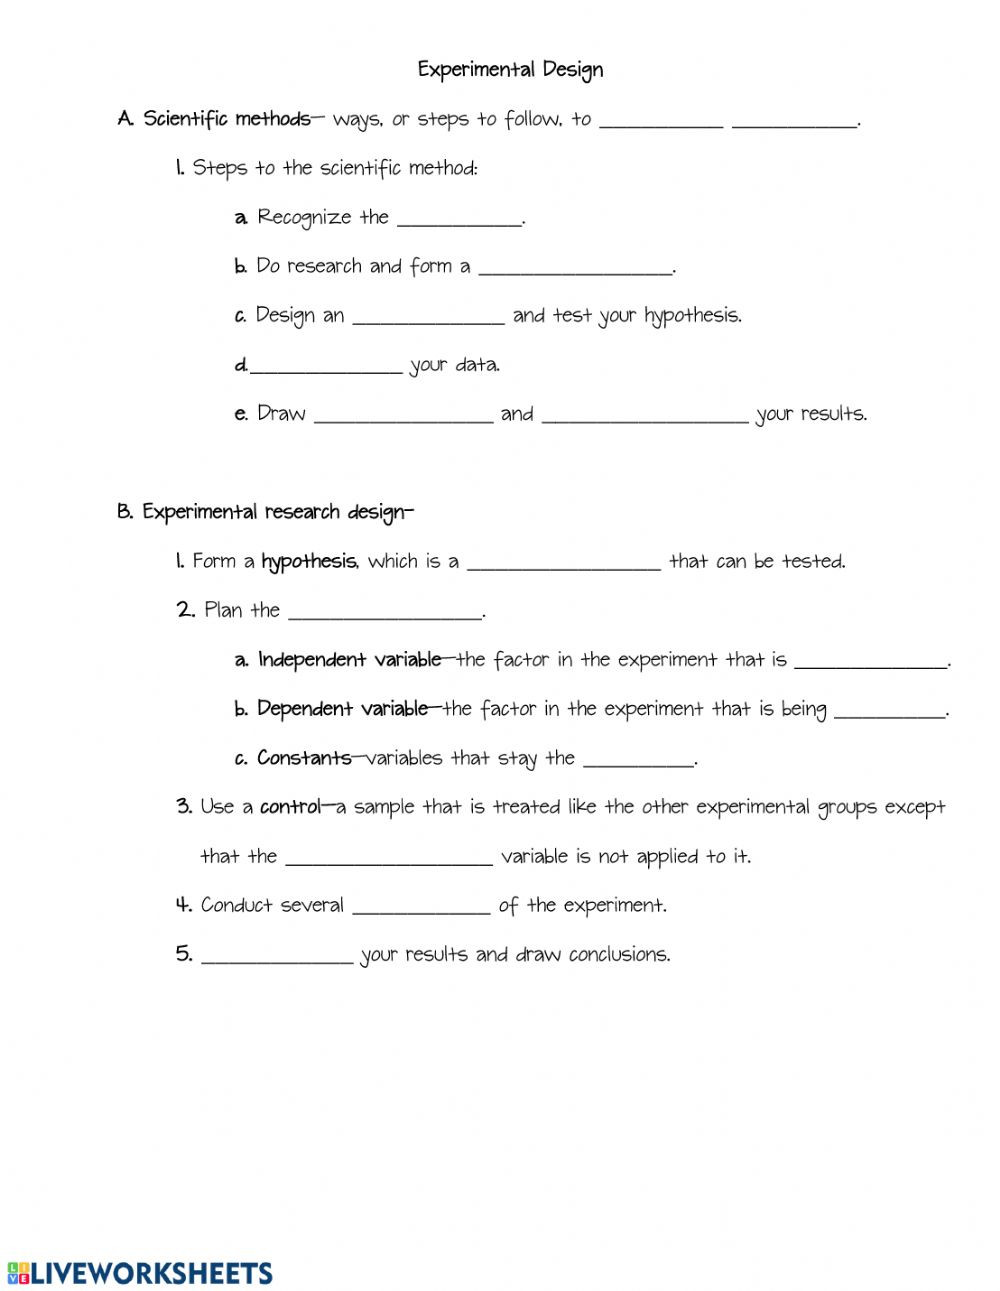 Designing An Experiment Worksheet Experimental Design Guided Notes Interactive Worksheet